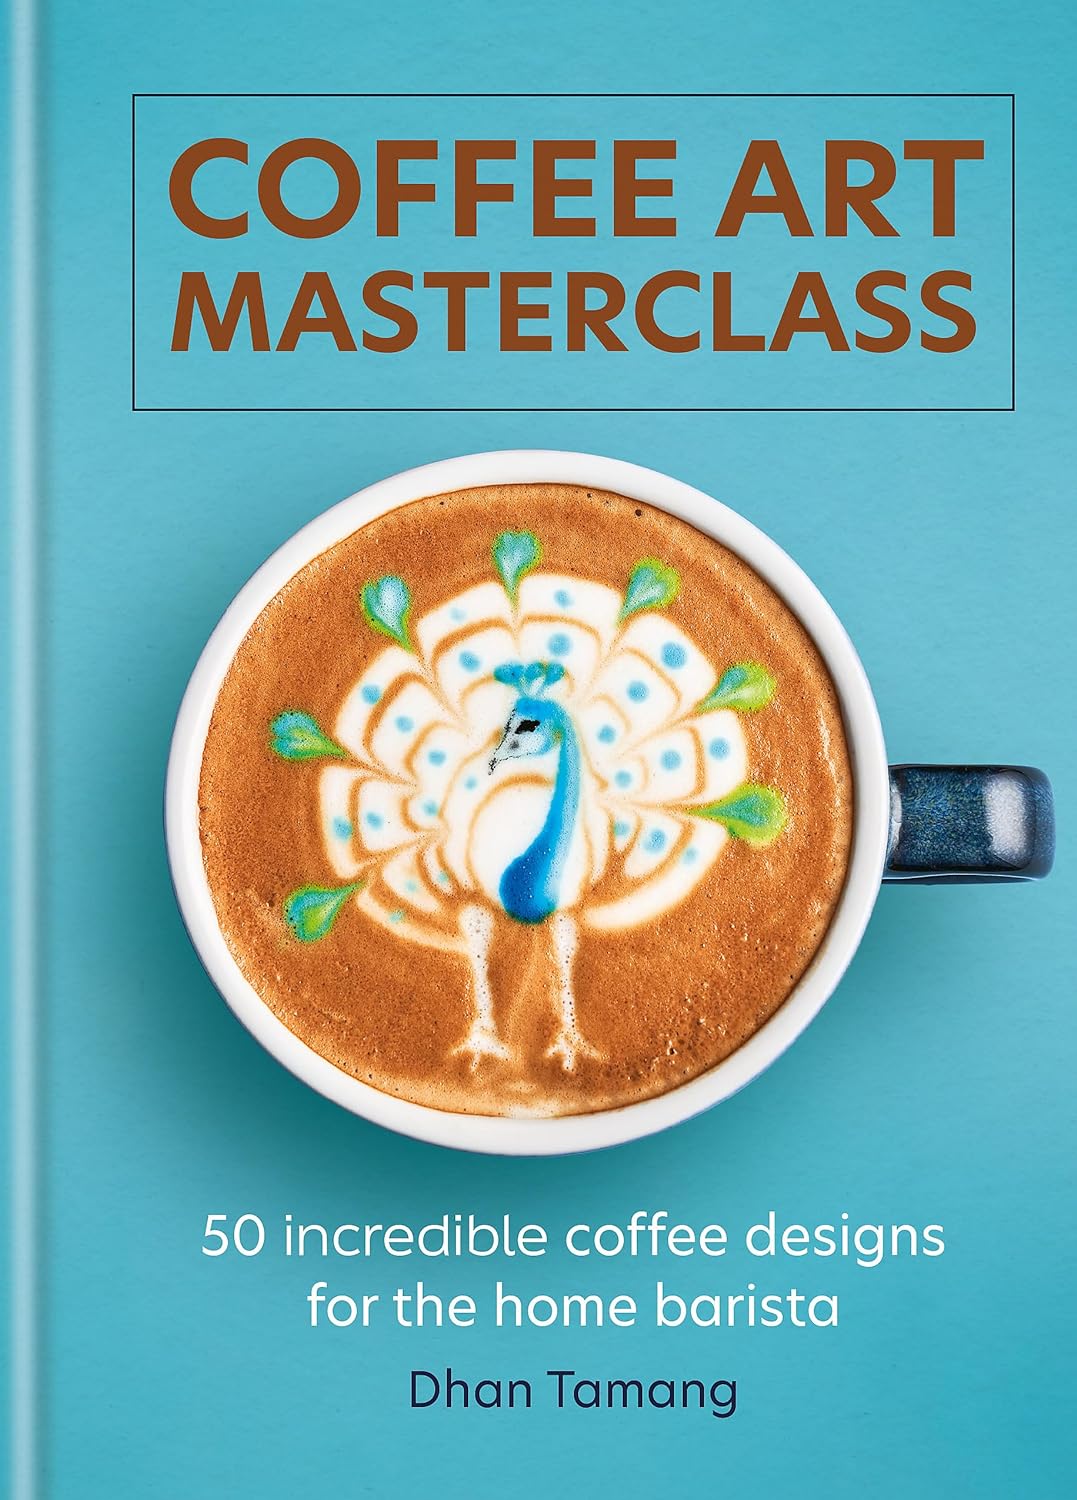 Coffee Art Masterclass: 50 incredible coffee designs for the home barista (Dhan Tamang)